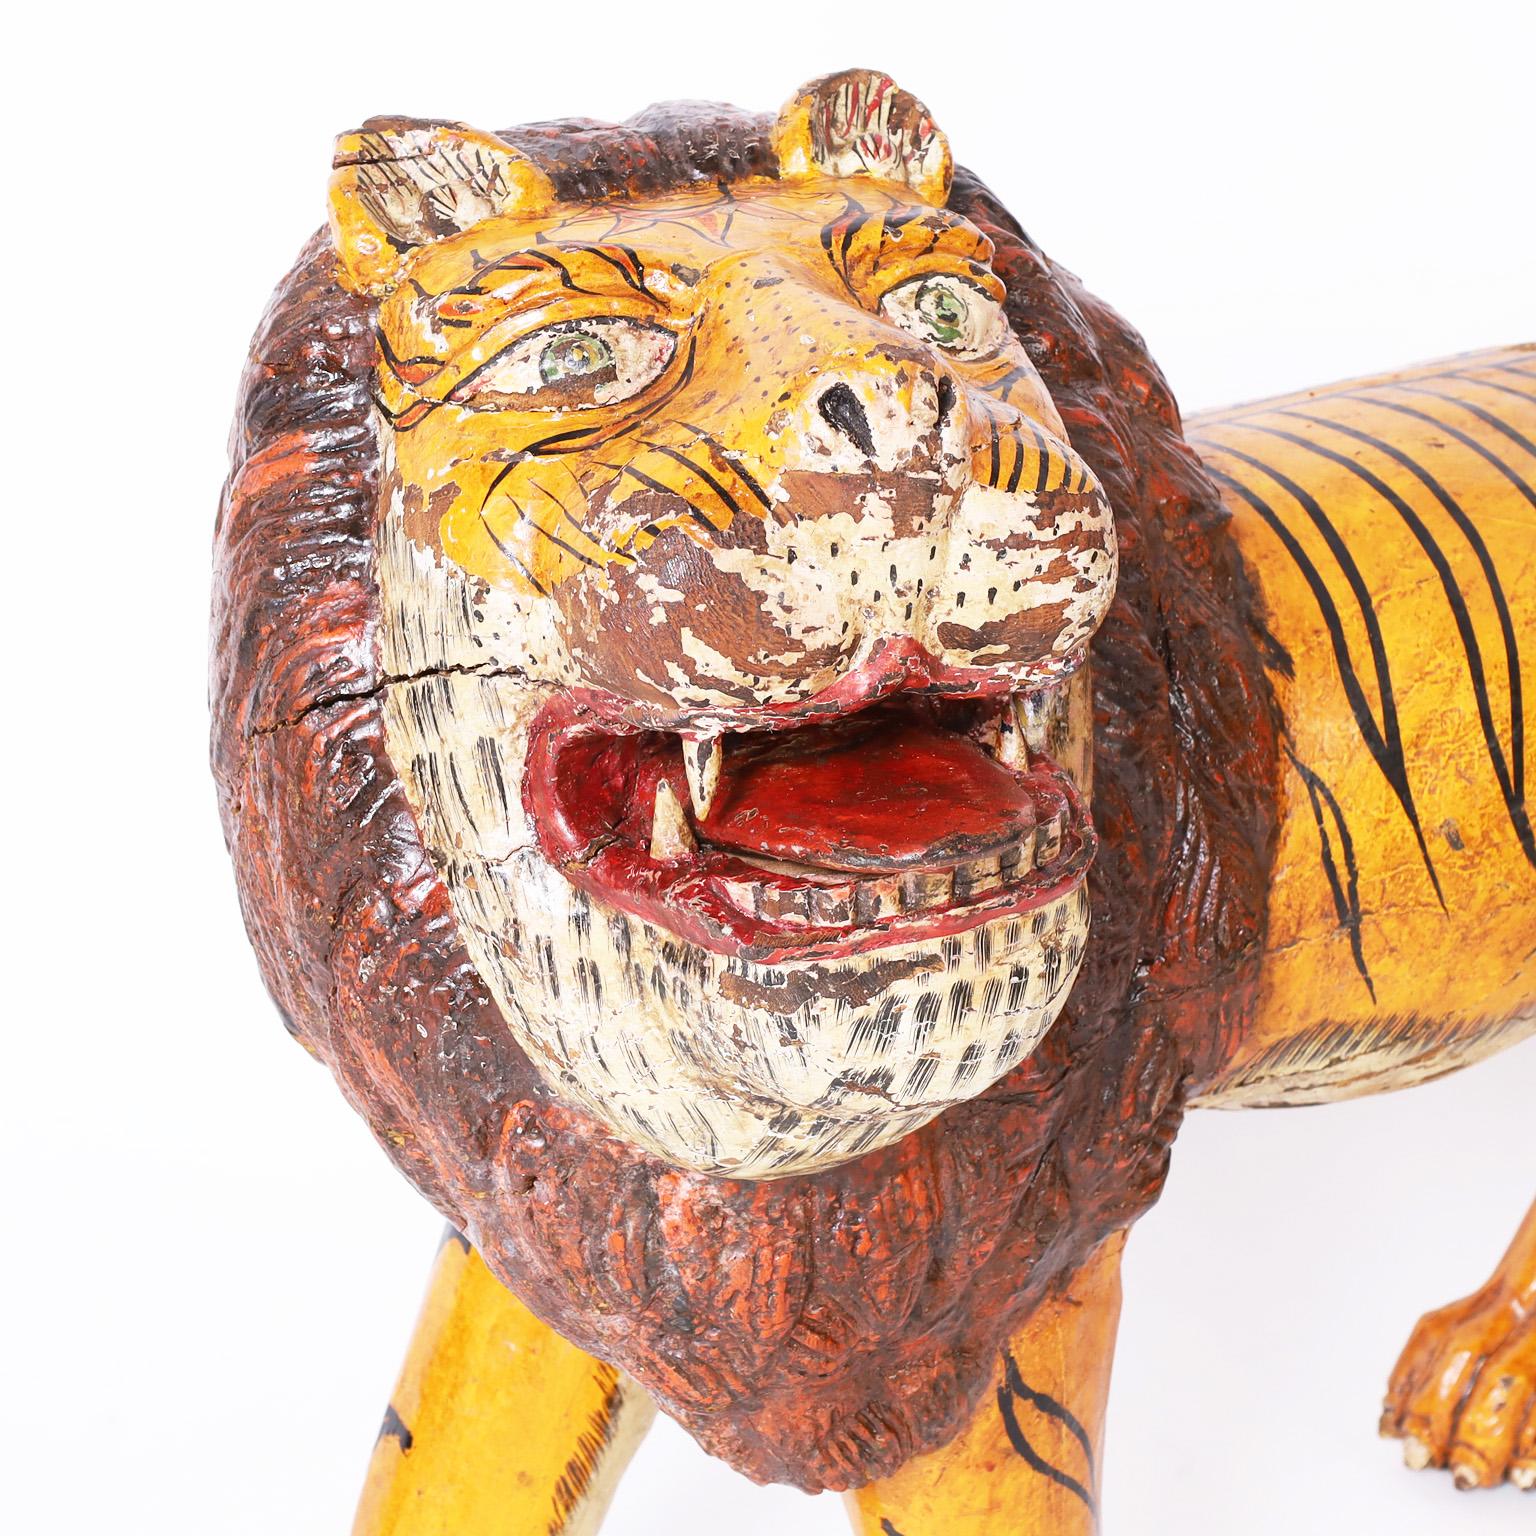 Whimsical carved mahogany rustic sculpture of a big cat with a surprising yet charming combination of the form of a lion and the stripes of a tiger. Retaining its original paint now worn to perfection.